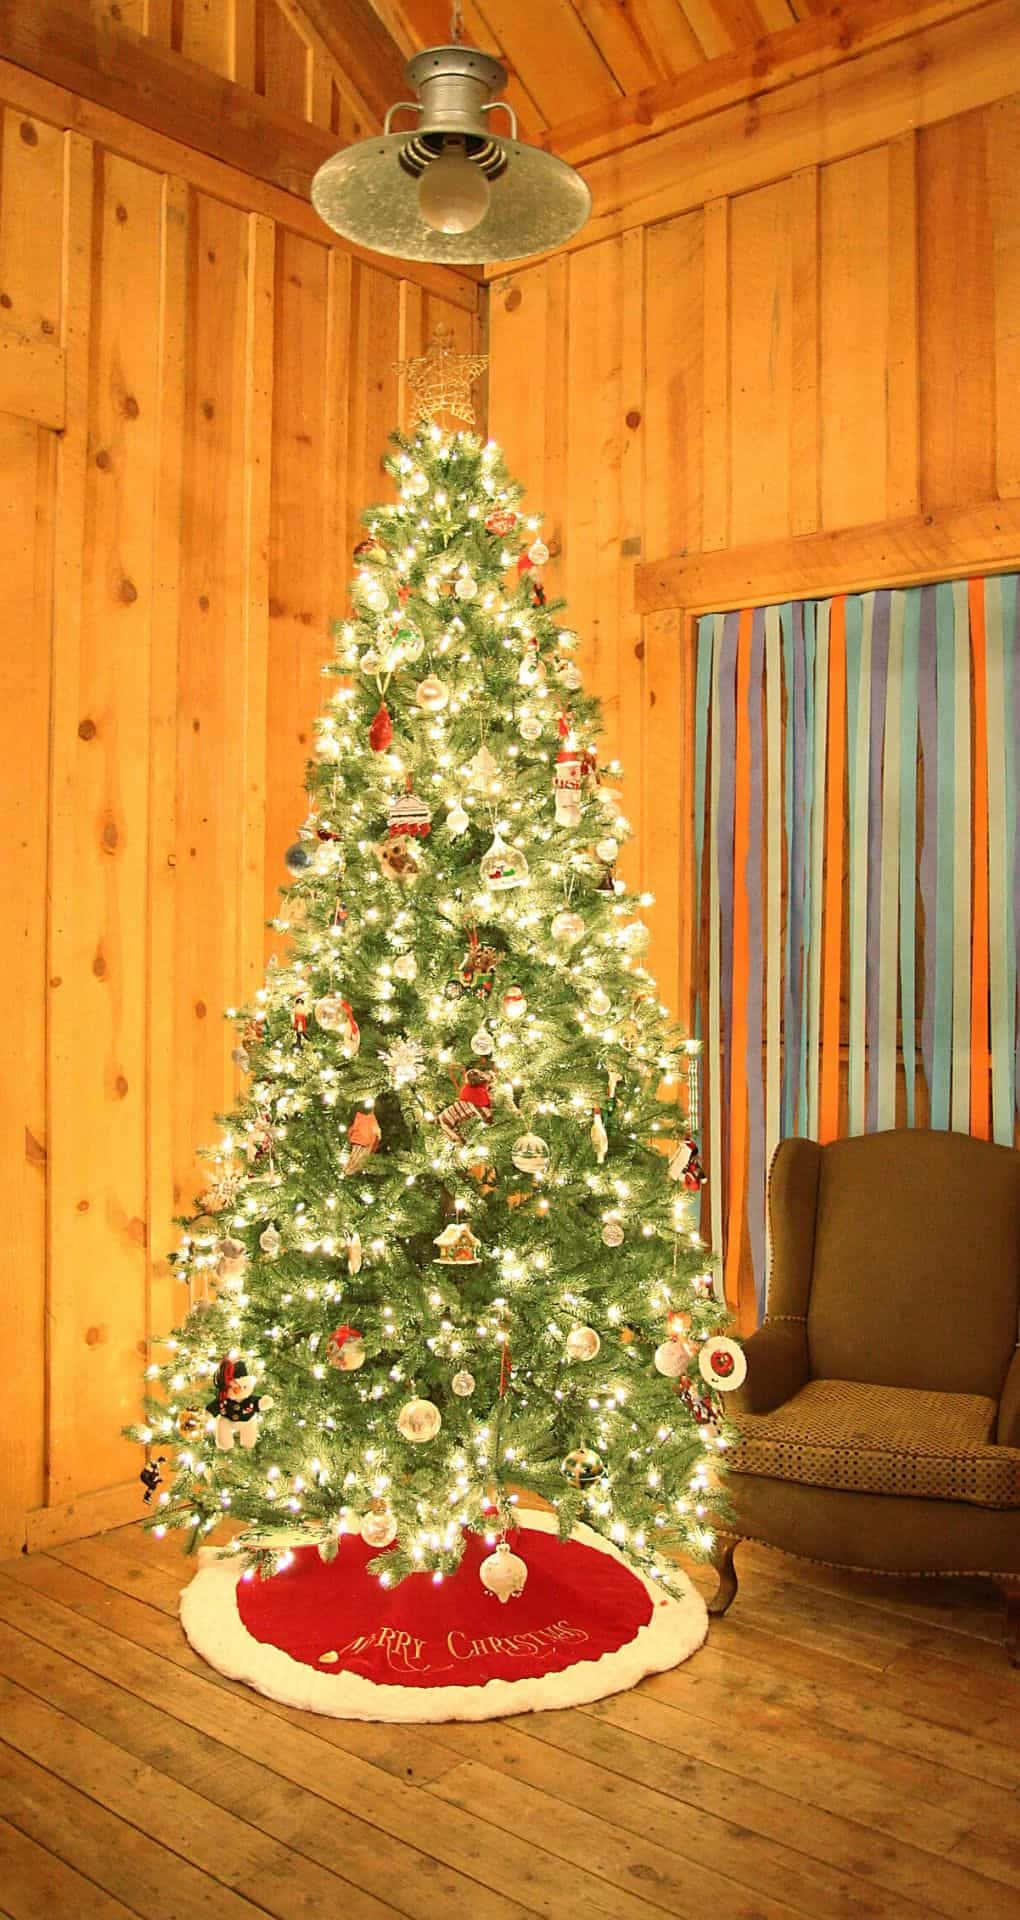 A tranquil Christmas tree adorns a room, creating a cozy and peaceful atmosphere. Wallpaper